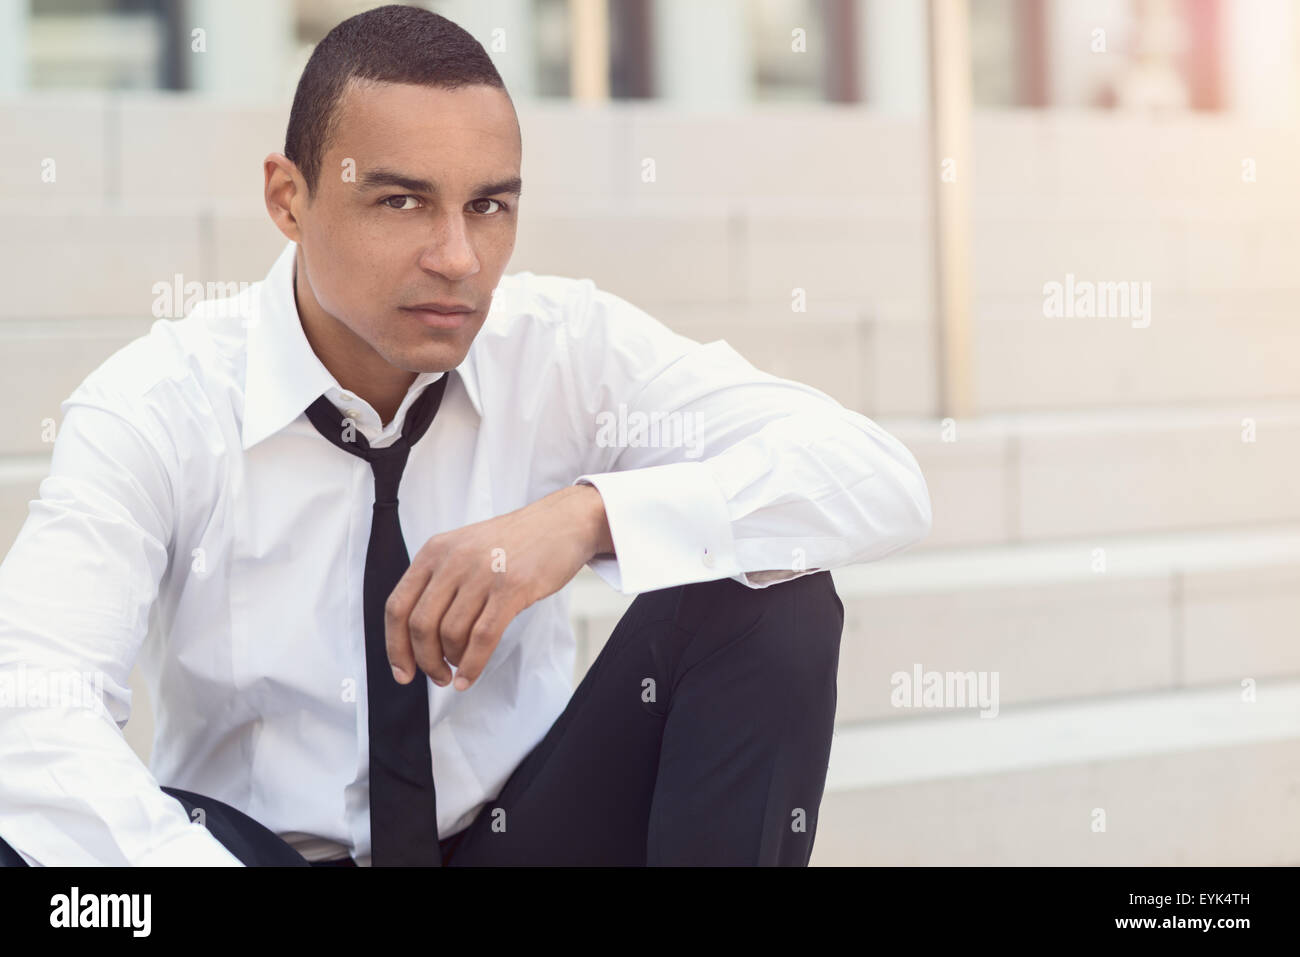 Attractive businessman with a loosened tie and his collar unbuttoned looking at the camera, closeup head and shoulders Stock Photo